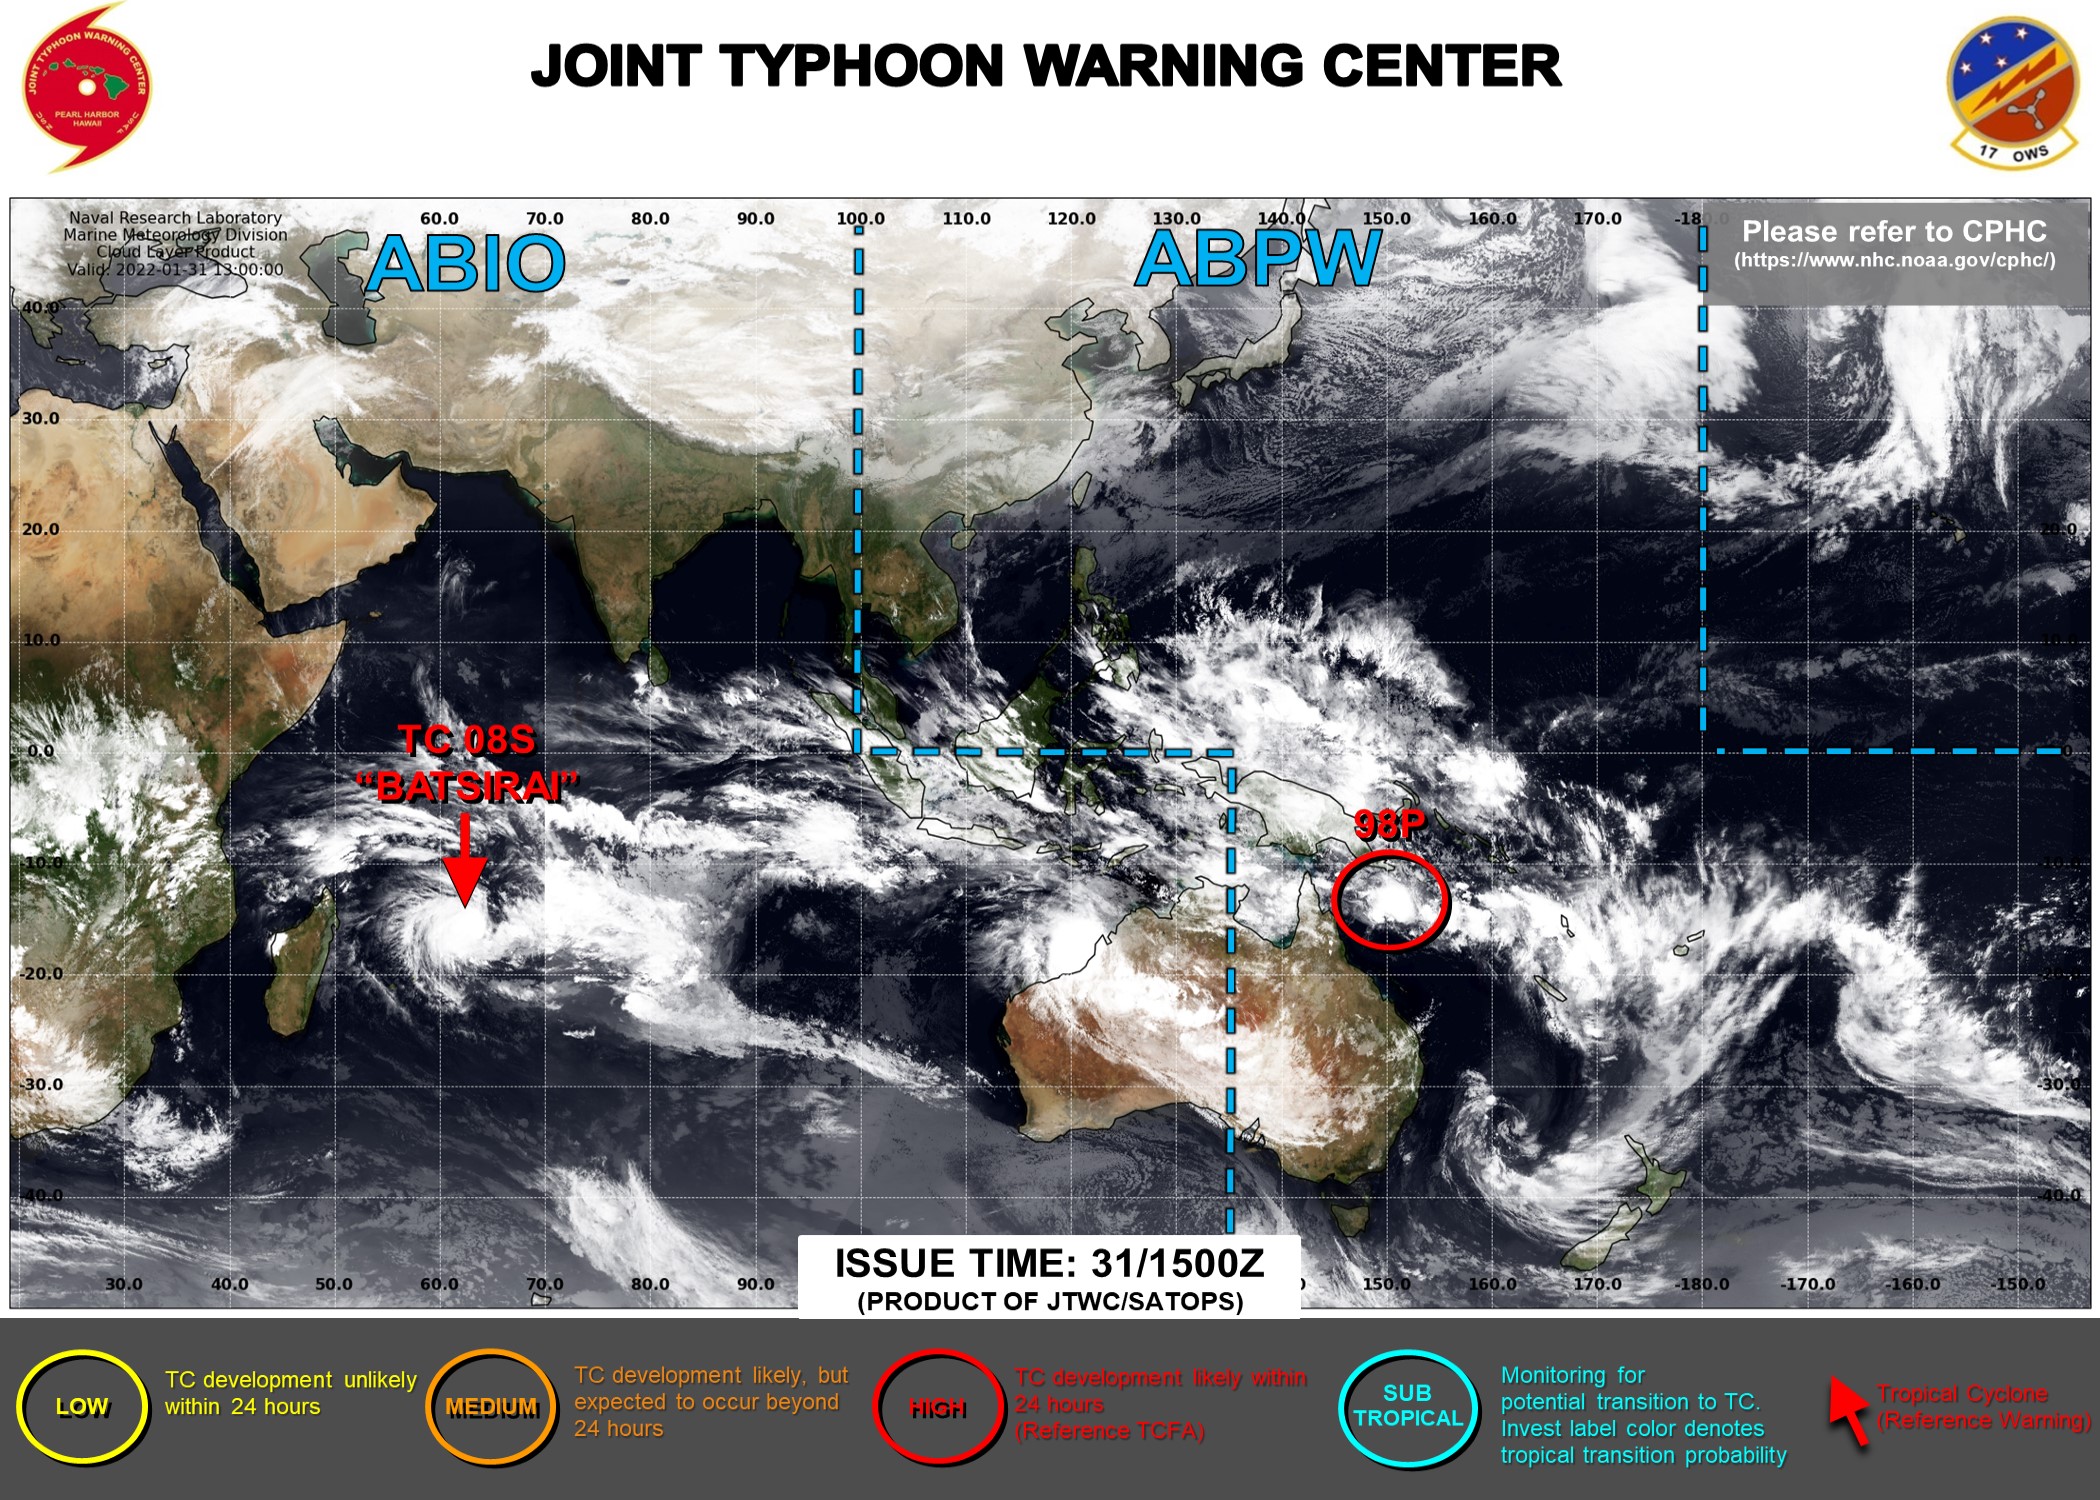 JTWC IS ISSUING 12HOURLY WARNINGS AND 3HOURLY SATELLITE BULLETINS ON TC 08S(BATSIRAI). 3HOURLY SATELLITE BULLETINS ARE ISSUED ON INVEST 98P.